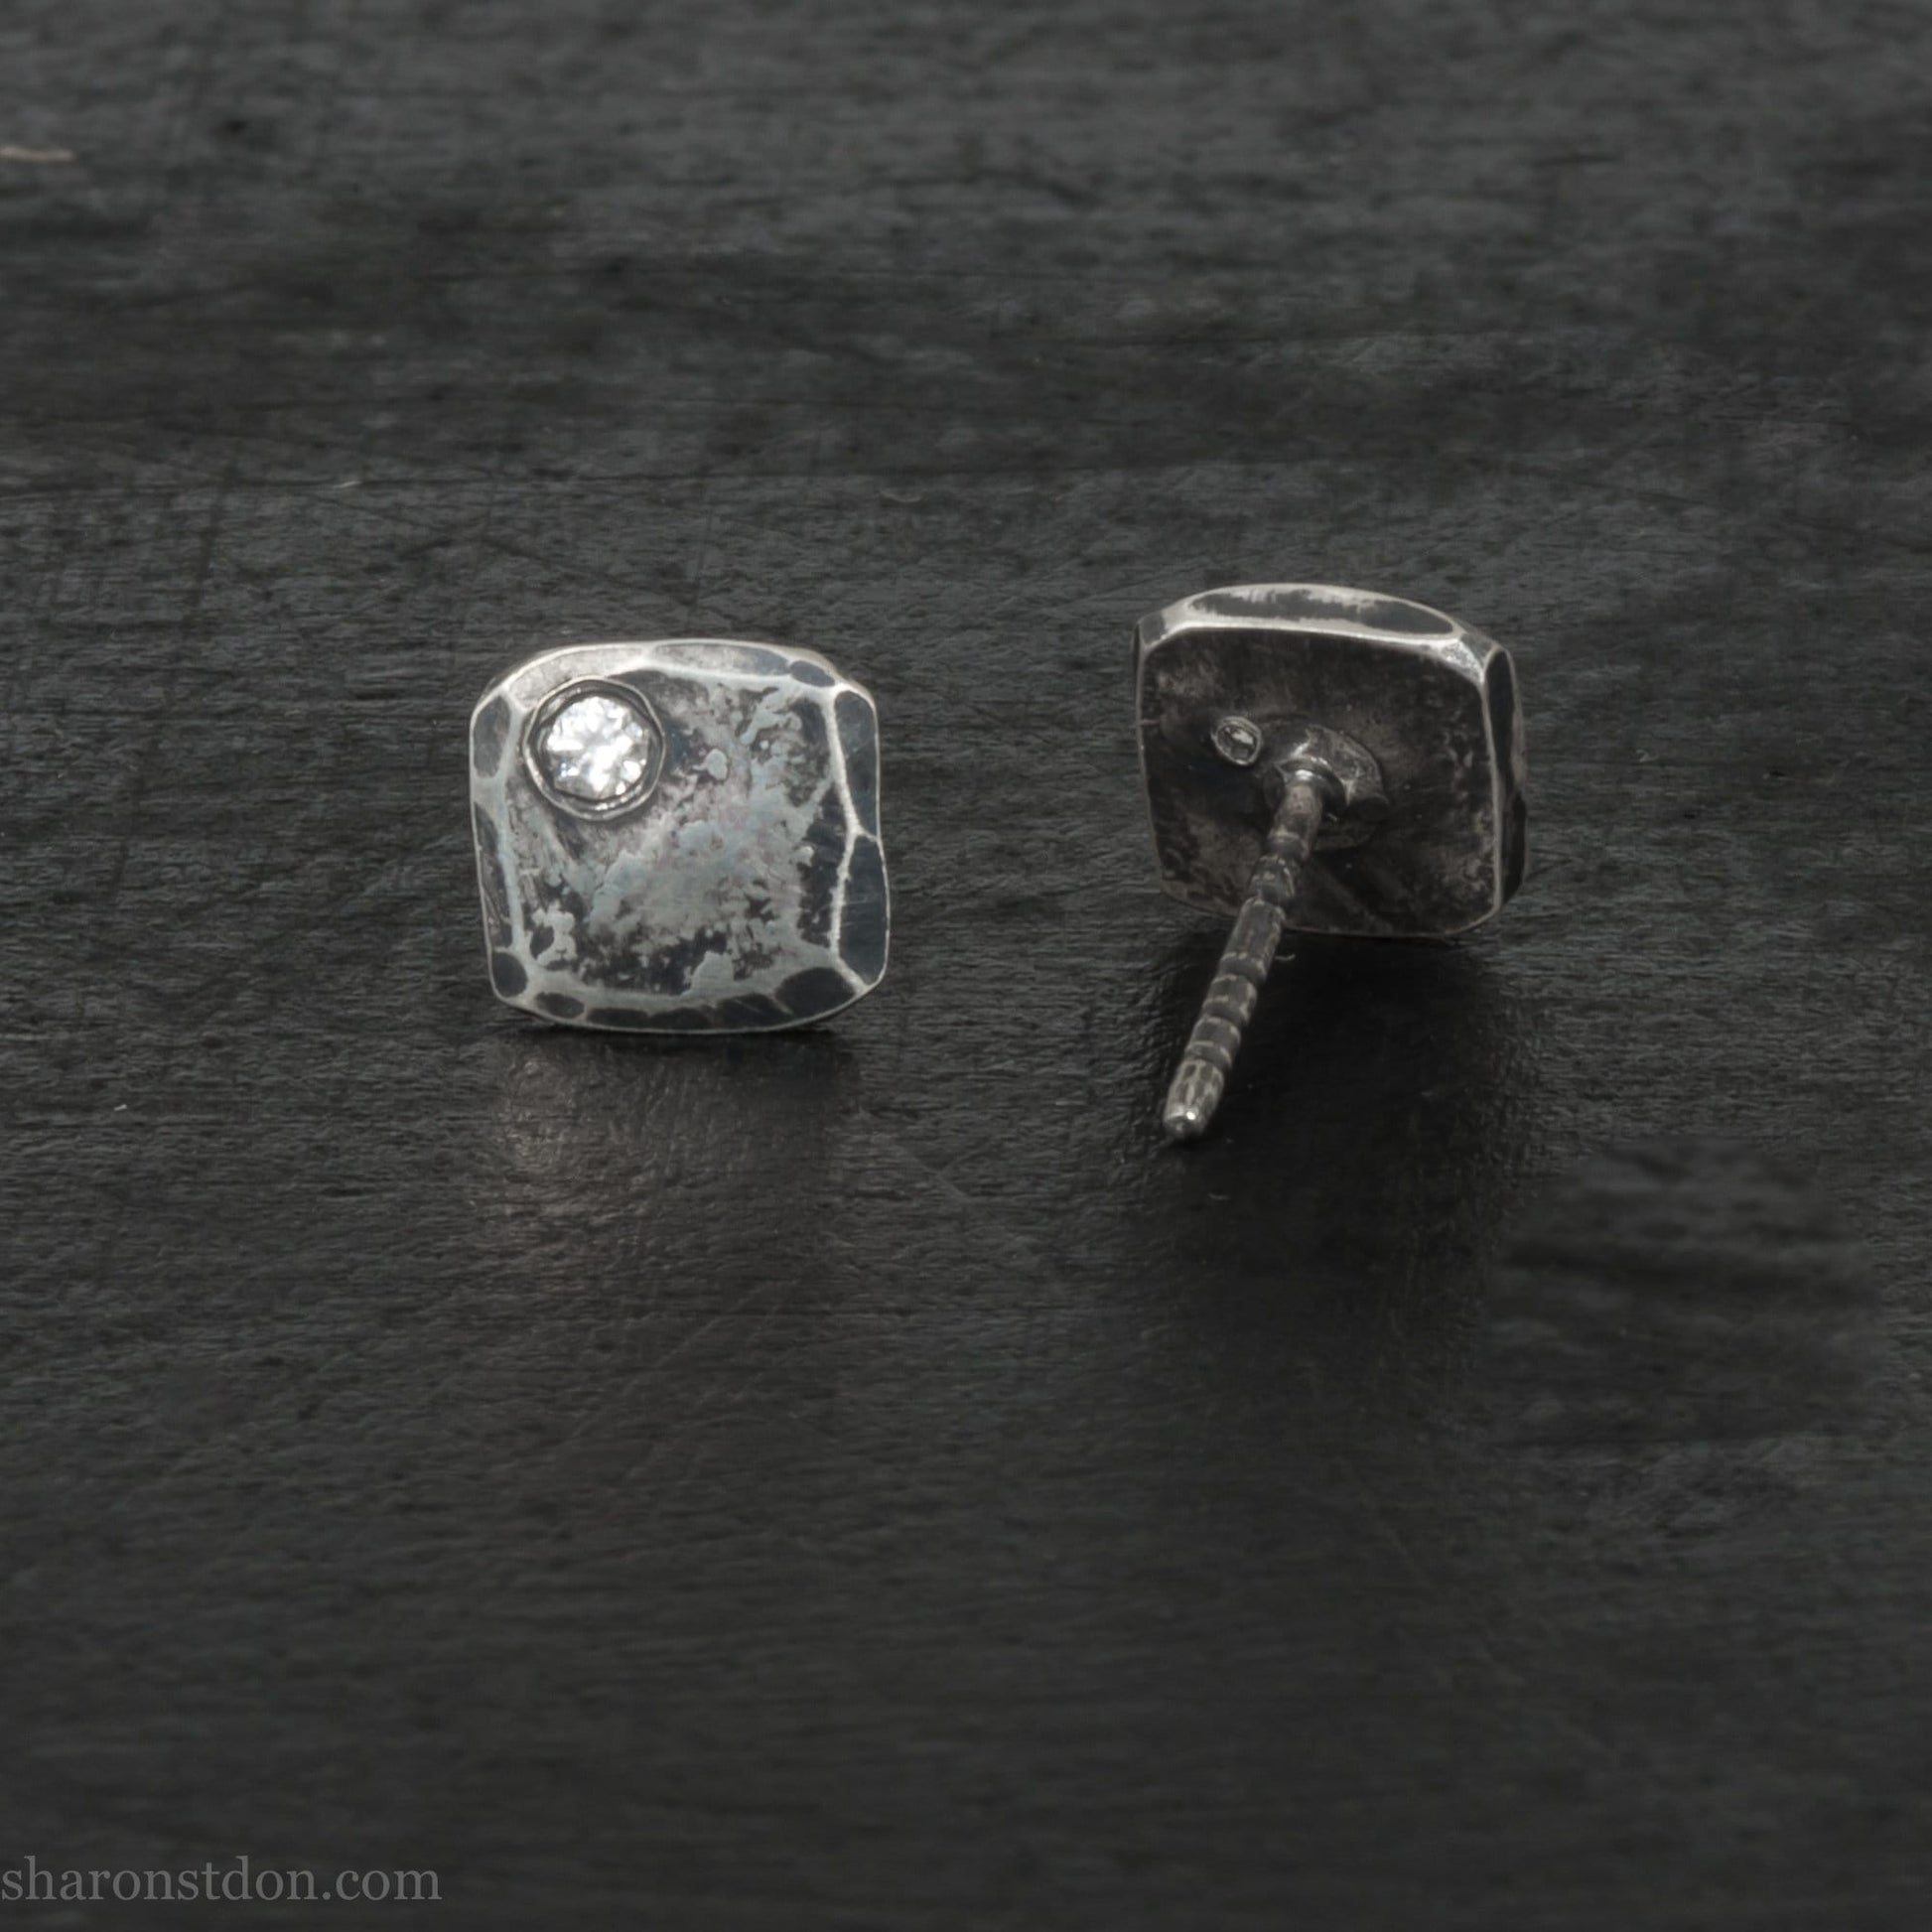 Handmade 925 sterling silver stud earrings with imitation diamond gemstones. Daily wear small square stud earrings made by Sharon SaintDon in North America.